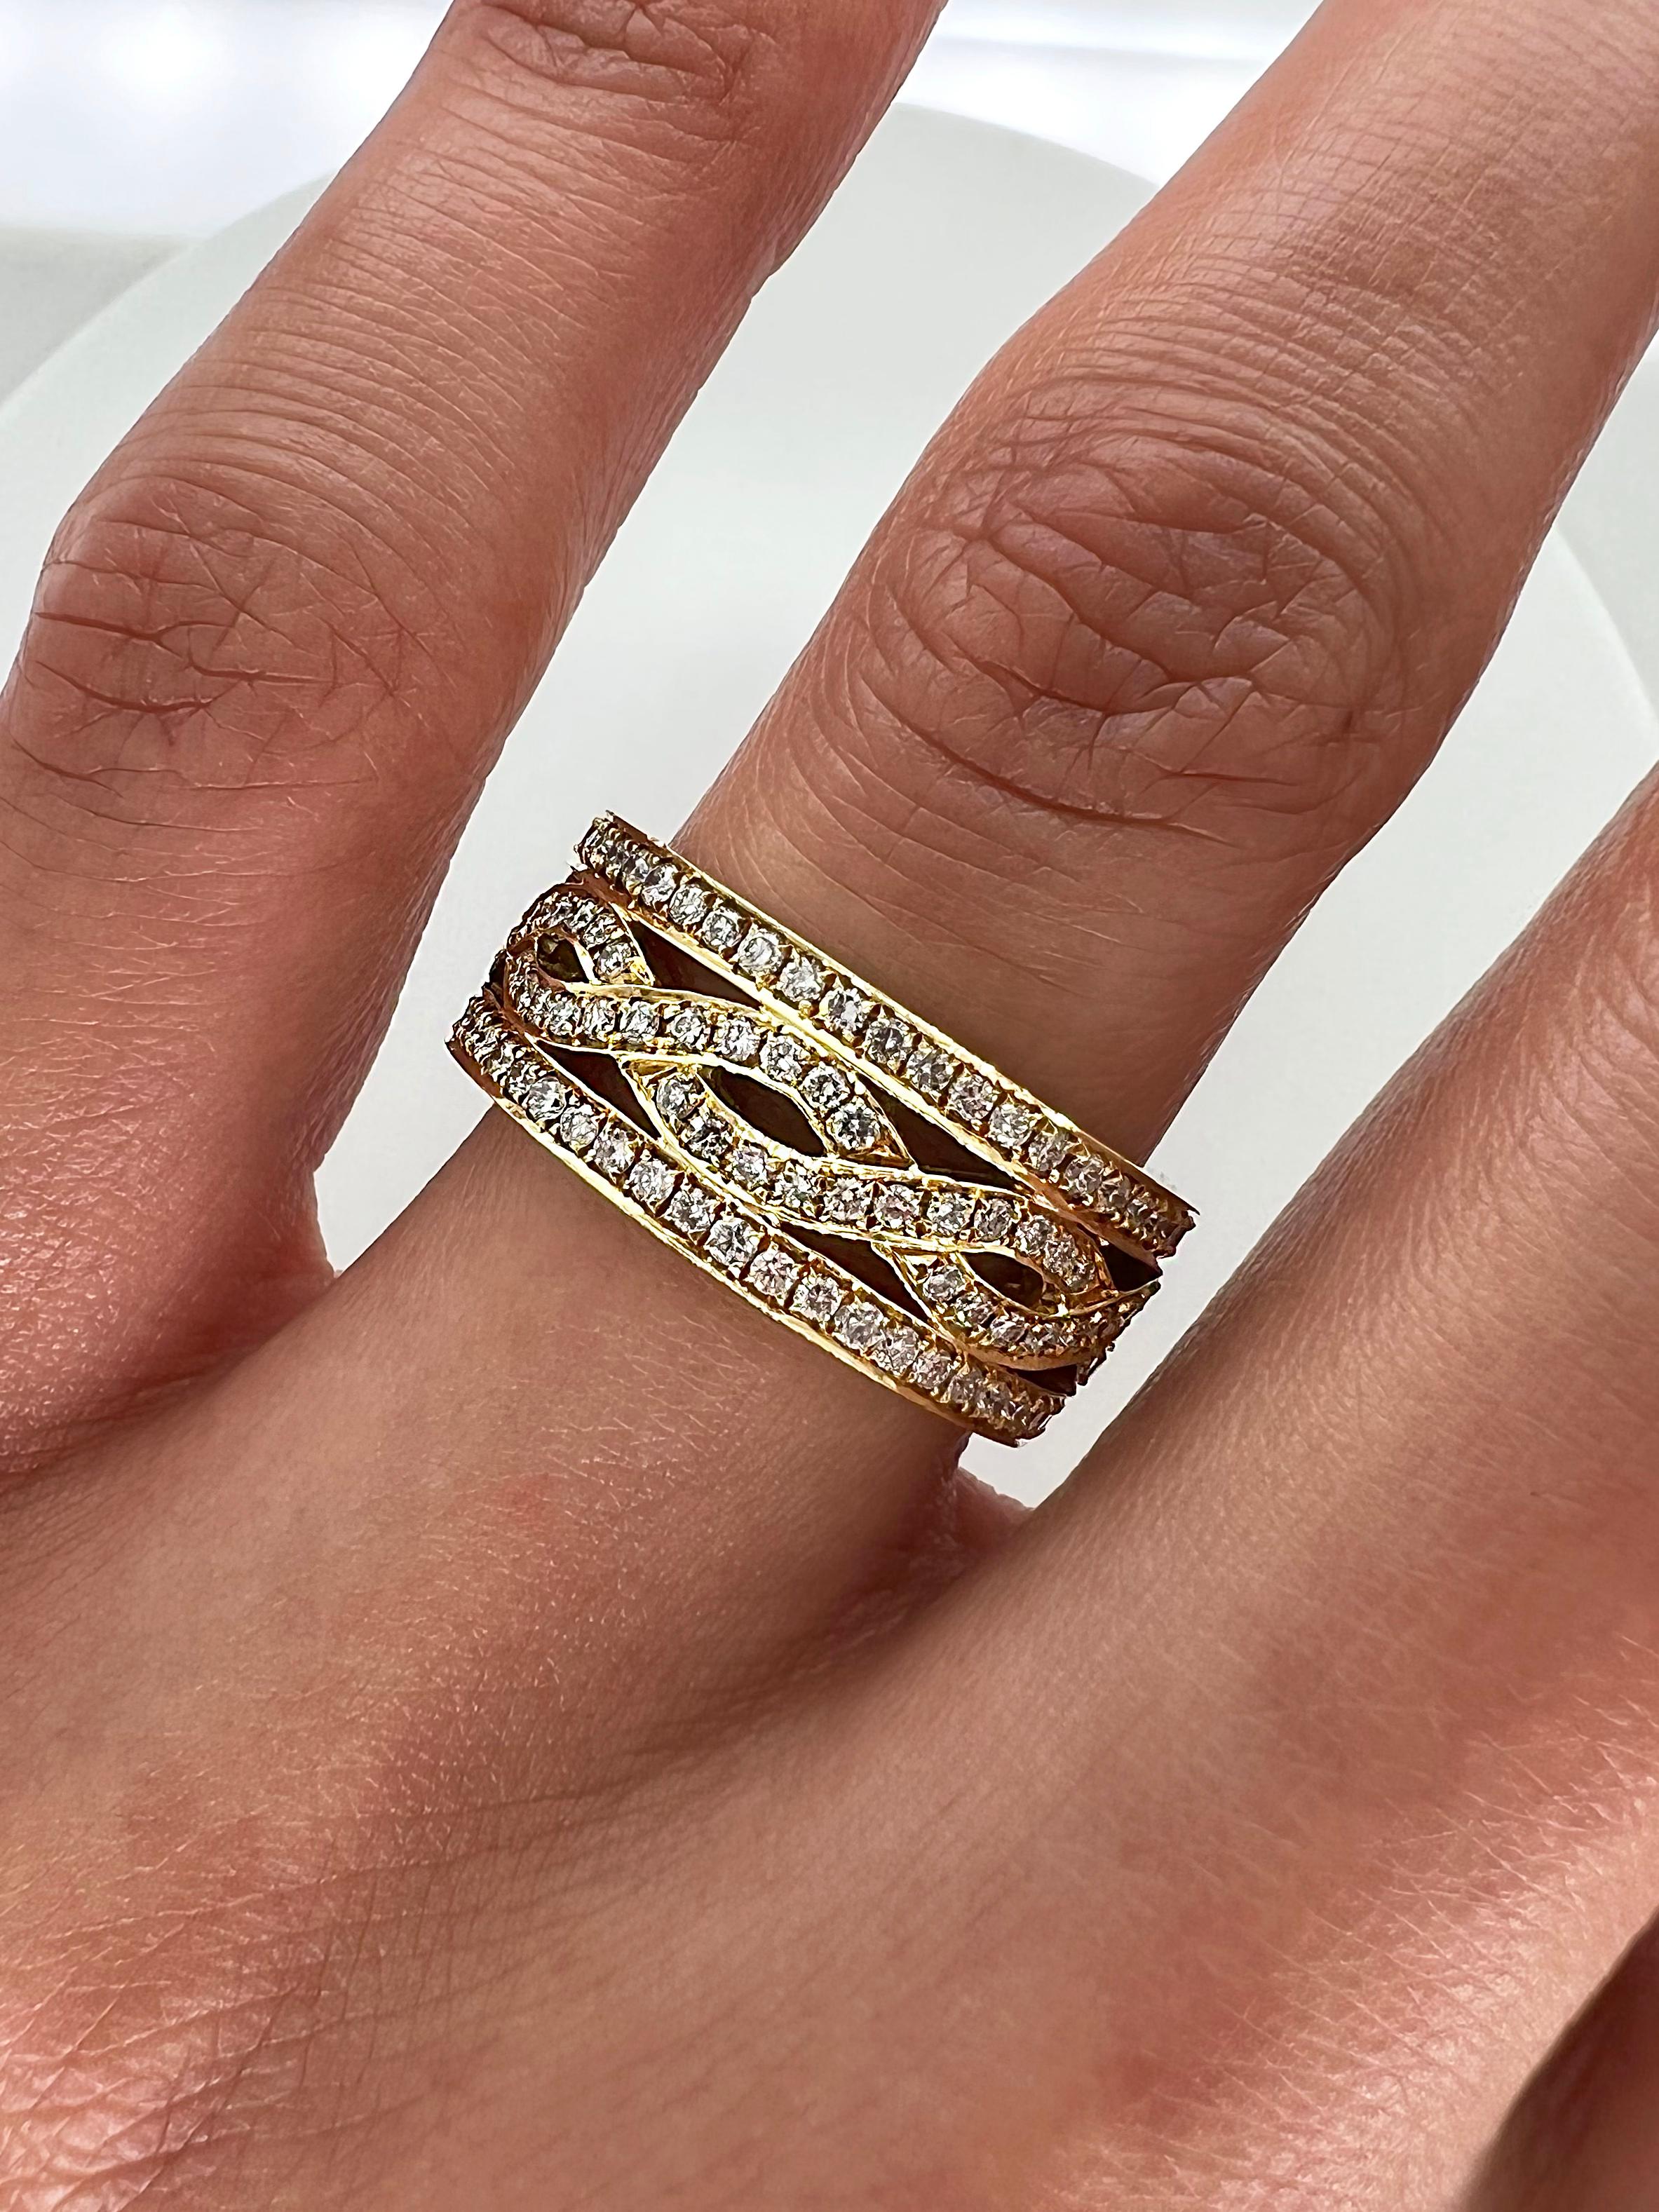 1.46 Carat Diamond Pave-Set Ladies Ring in 18K Yellow Gold In New Condition For Sale In New York, NY